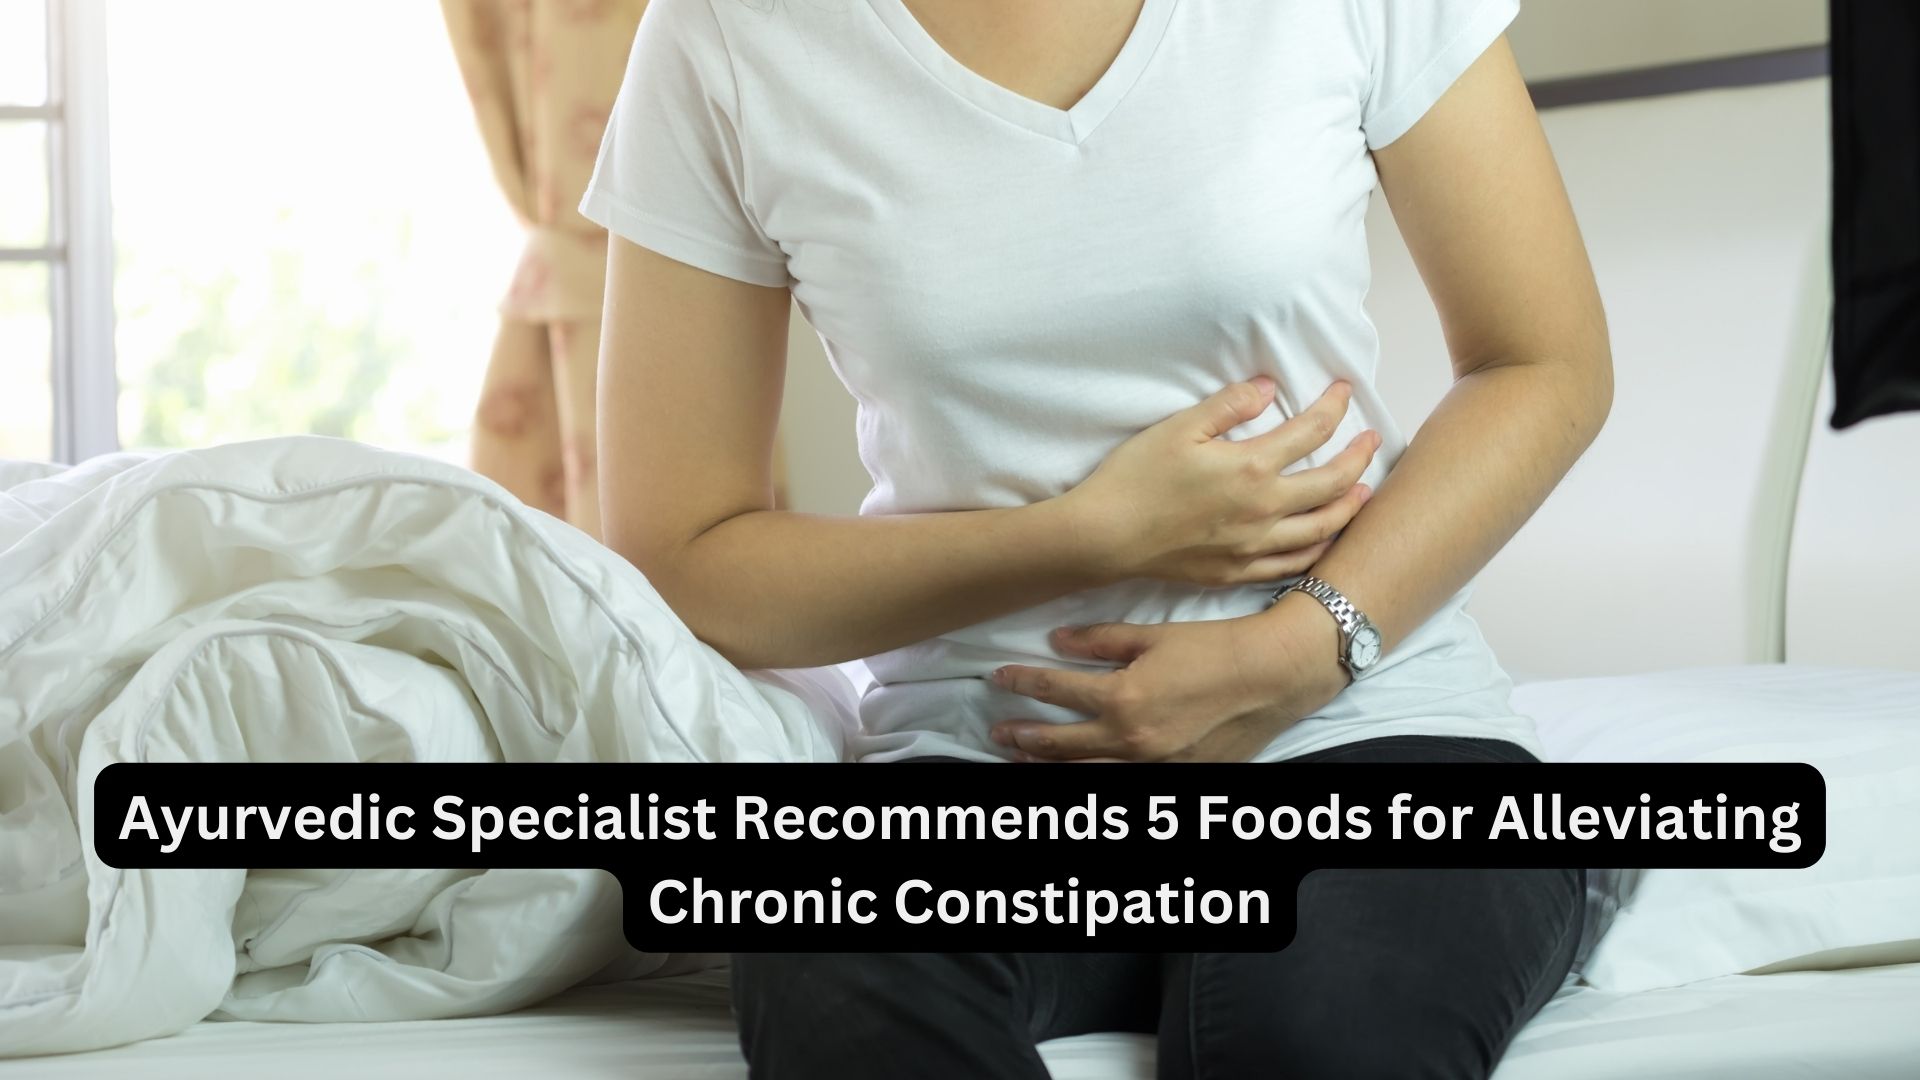 Ayurvedic Specialist Recommends 5 Foods for Alleviating Chronic Constipation